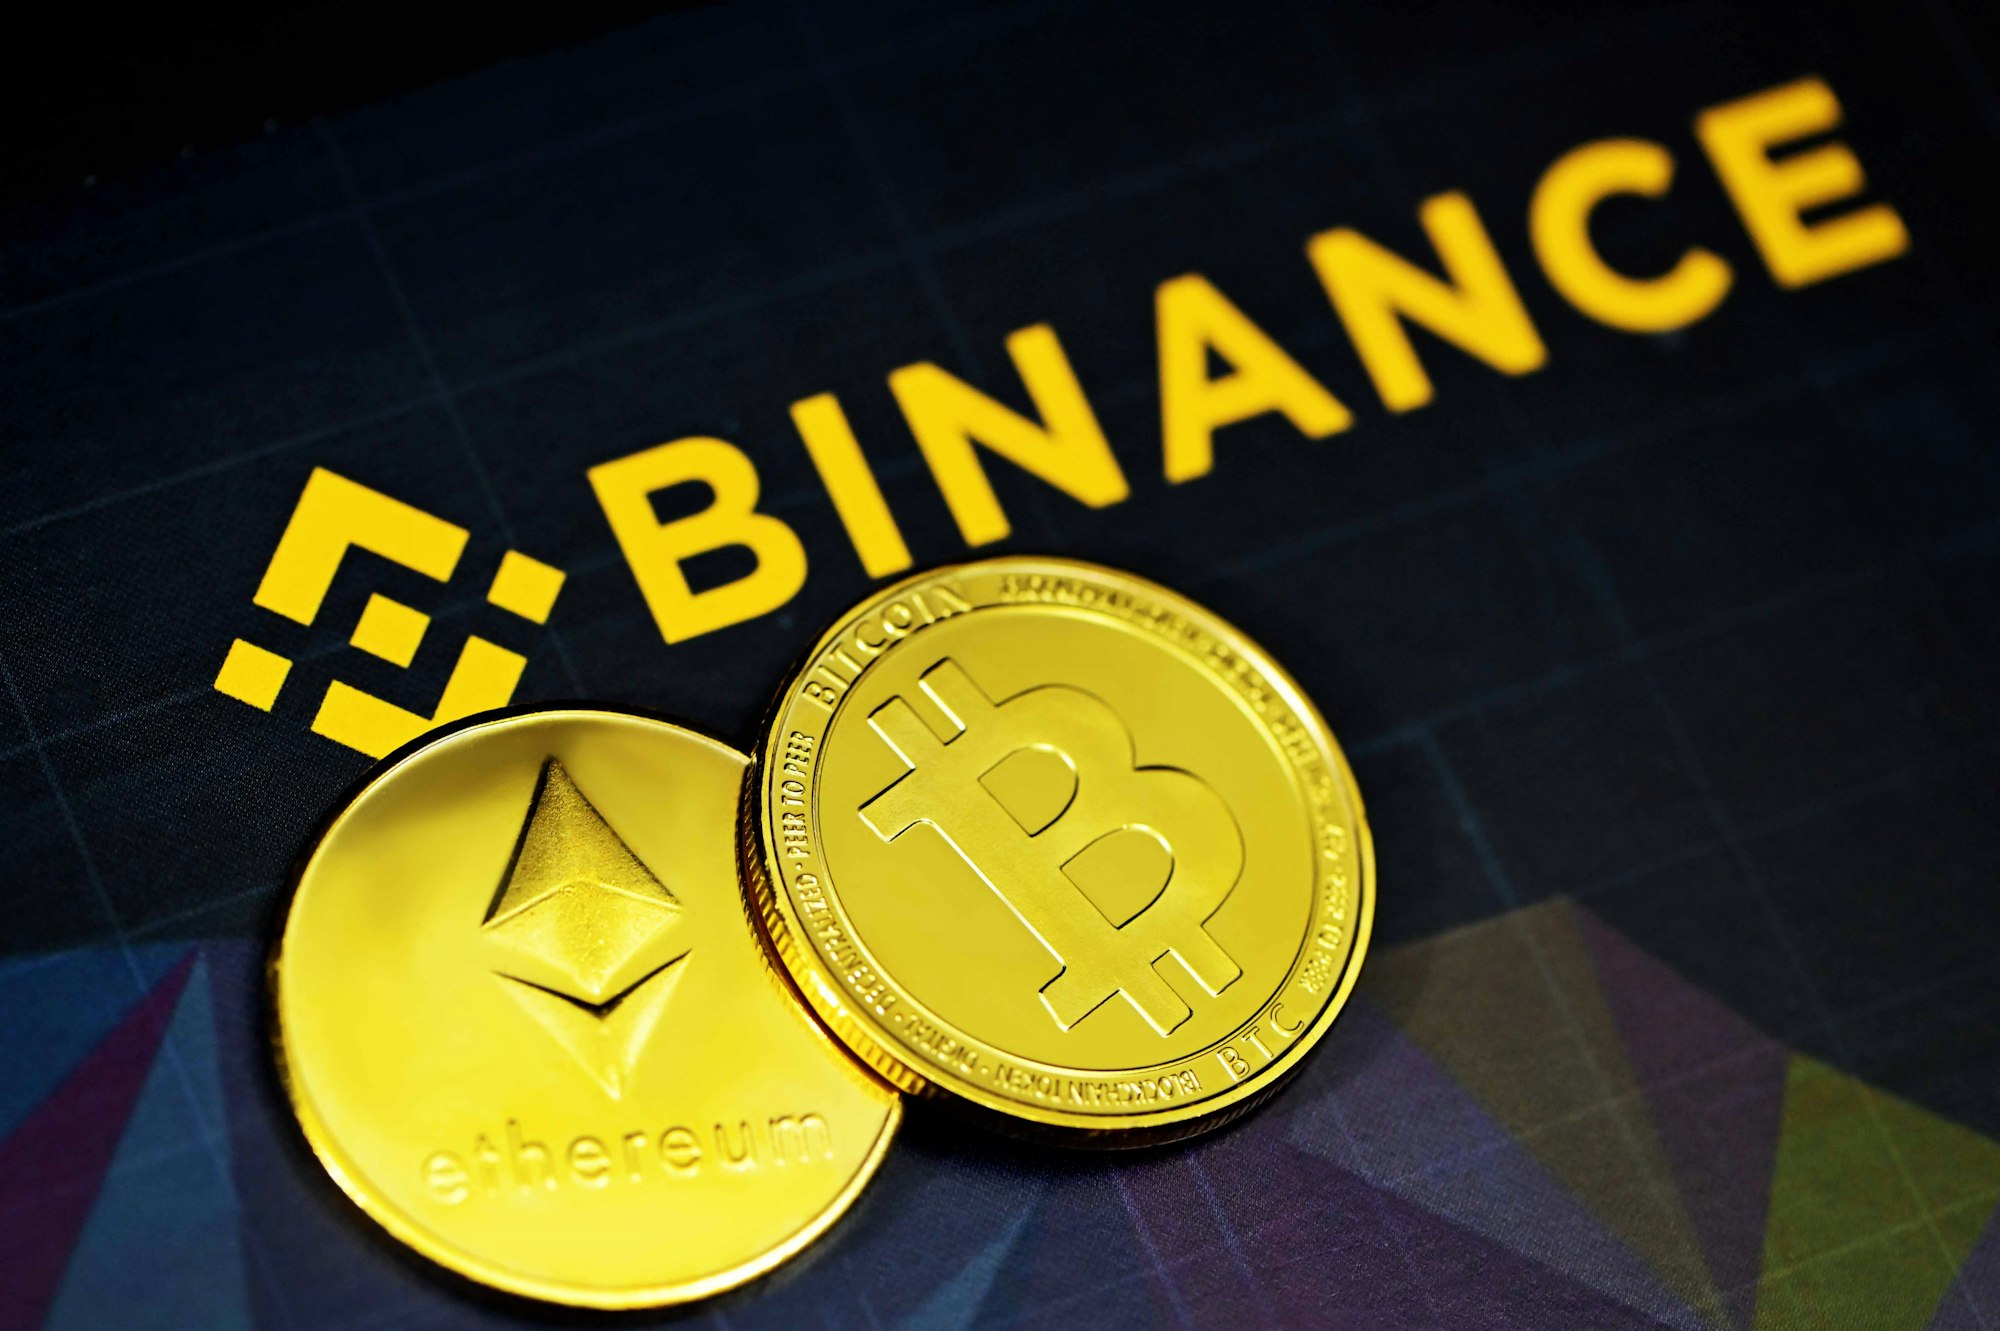 Binance plans to acquire this crypto exchange for $1 billion